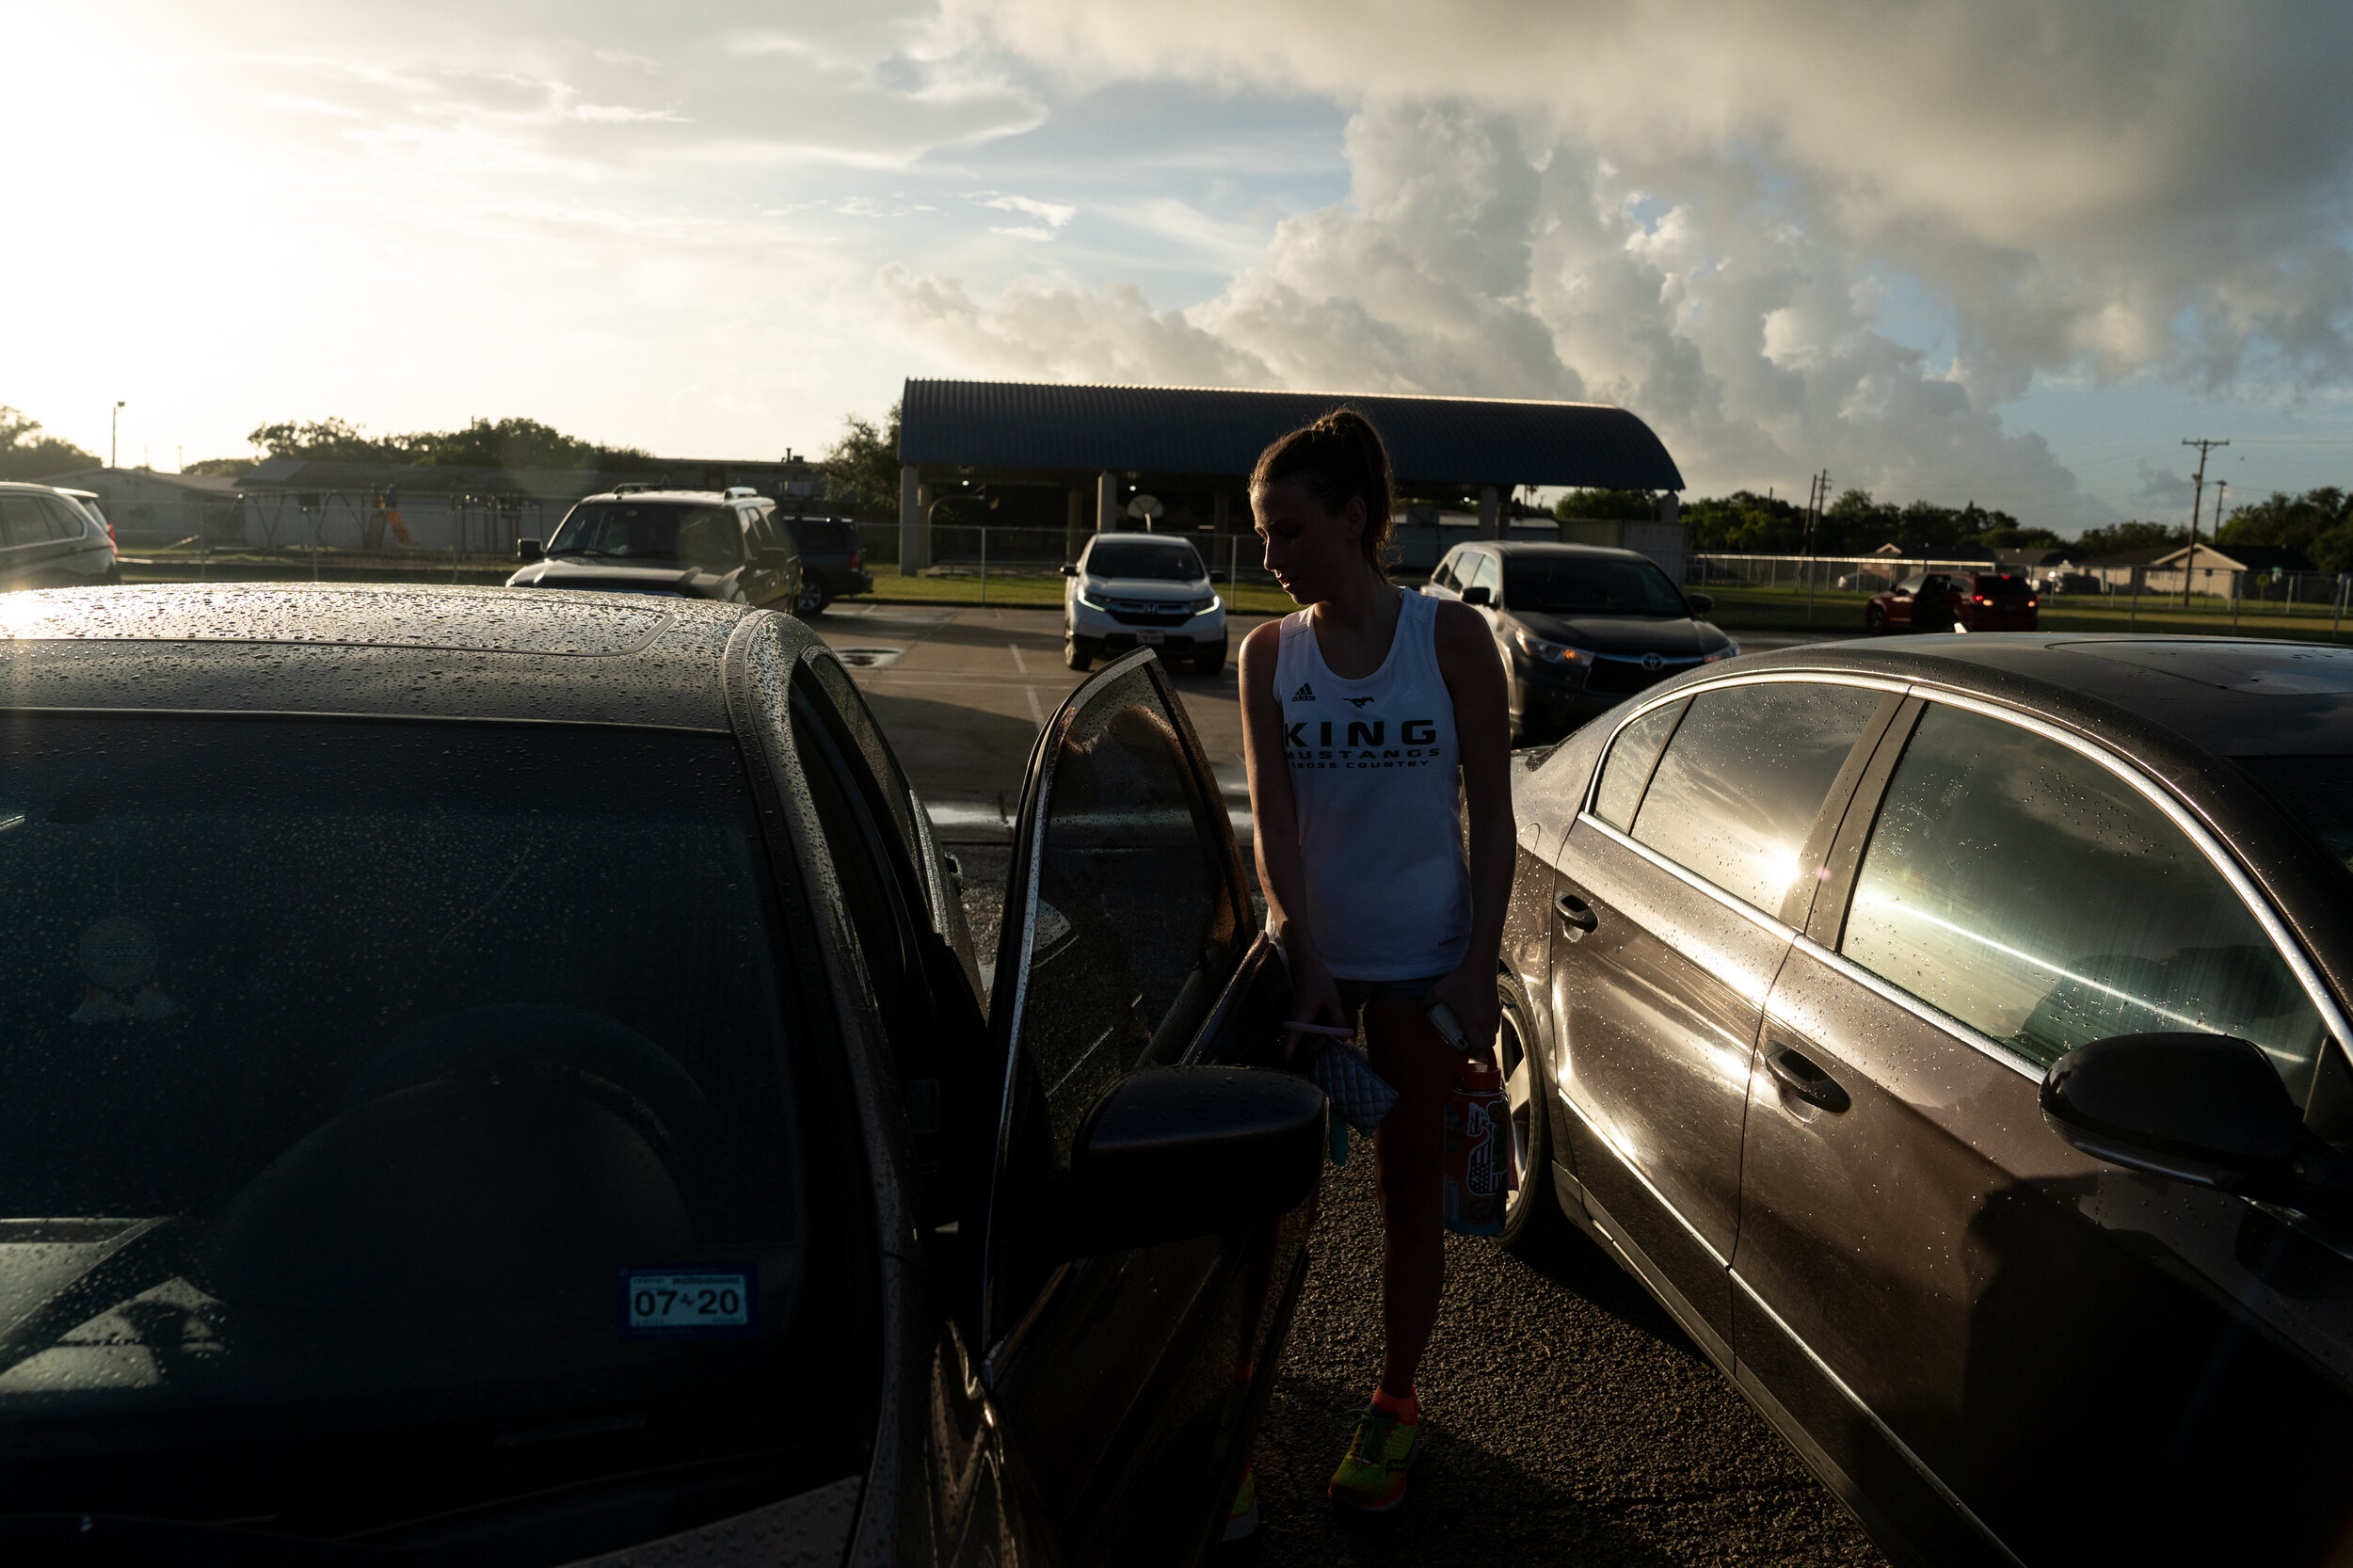  CORPUS CHRISTI, TEXAS - September 9, 2020: Ella Cole, 17, leaves Richard King High School to go home and shower and make breakfast before remote class begins. 